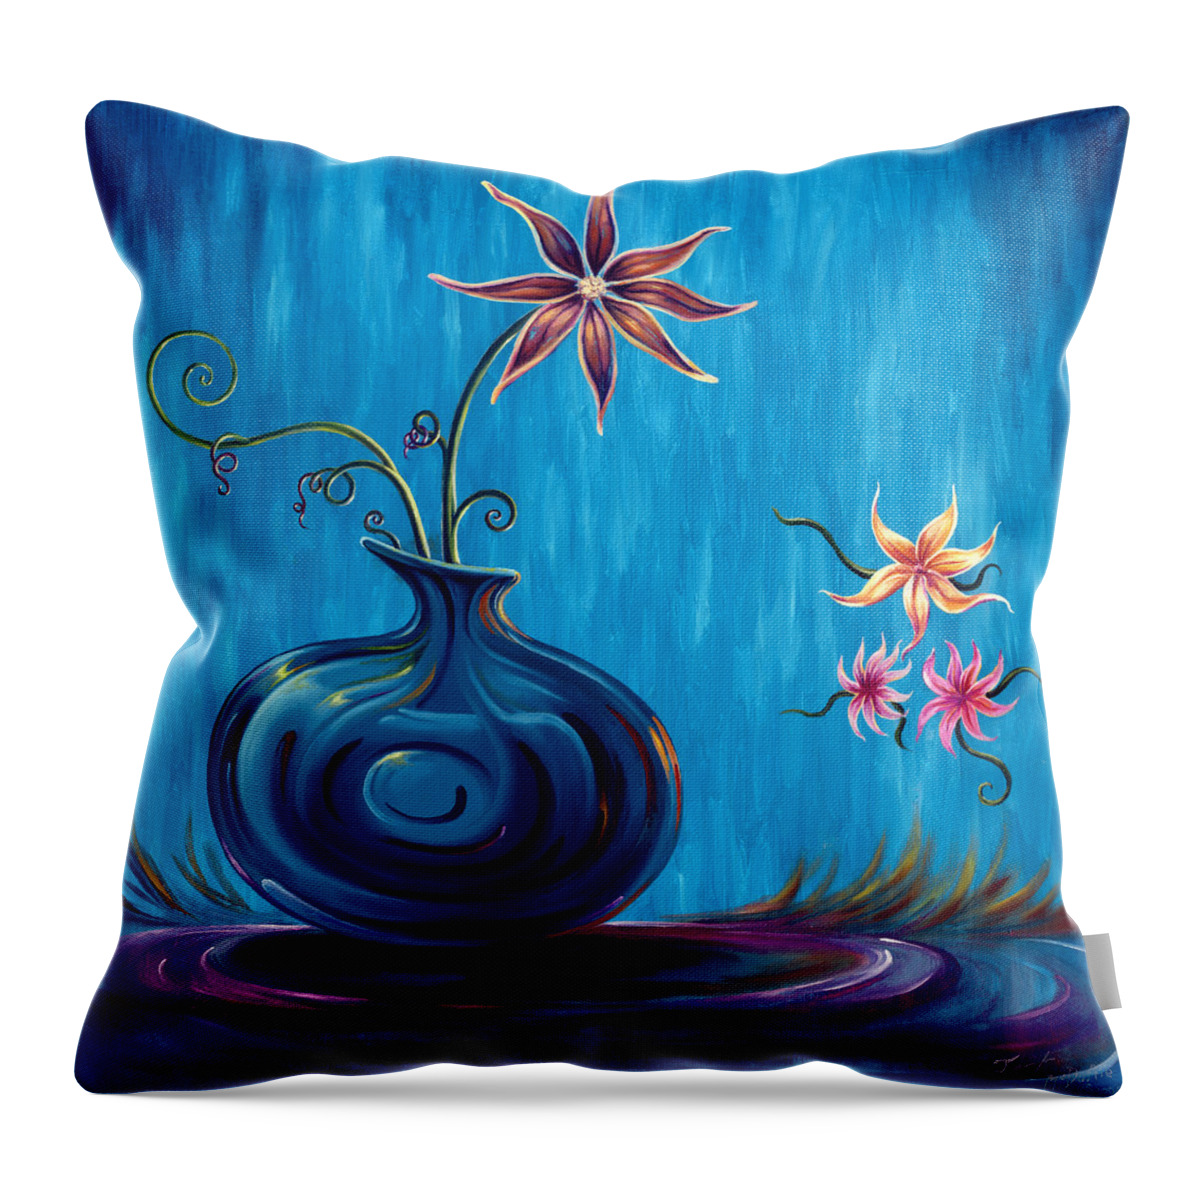 Fantasy Floral Scape Throw Pillow featuring the painting Aloha Rain by Jennifer McDuffie